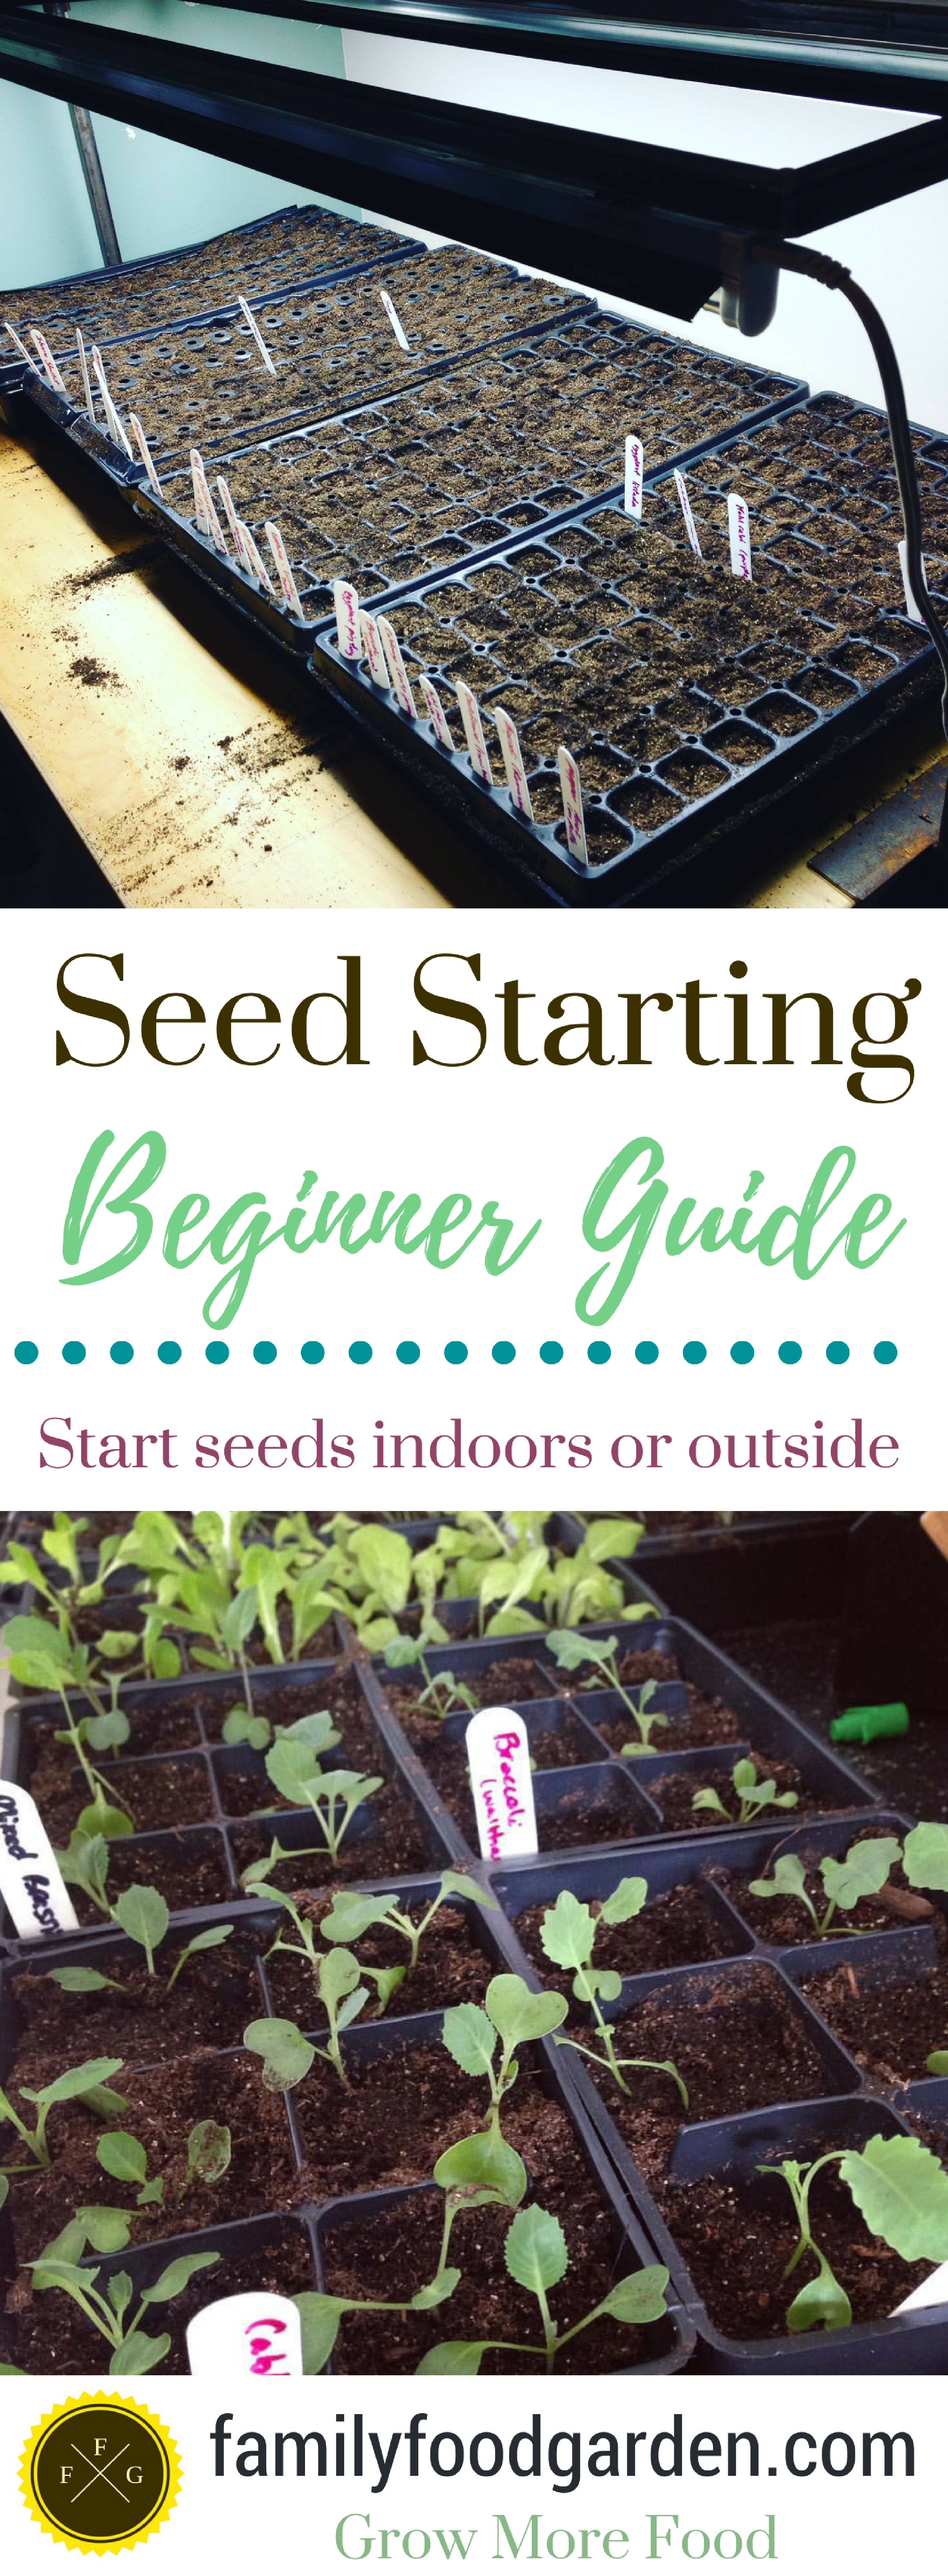 Learn how to plant seeds in this seed starting guide